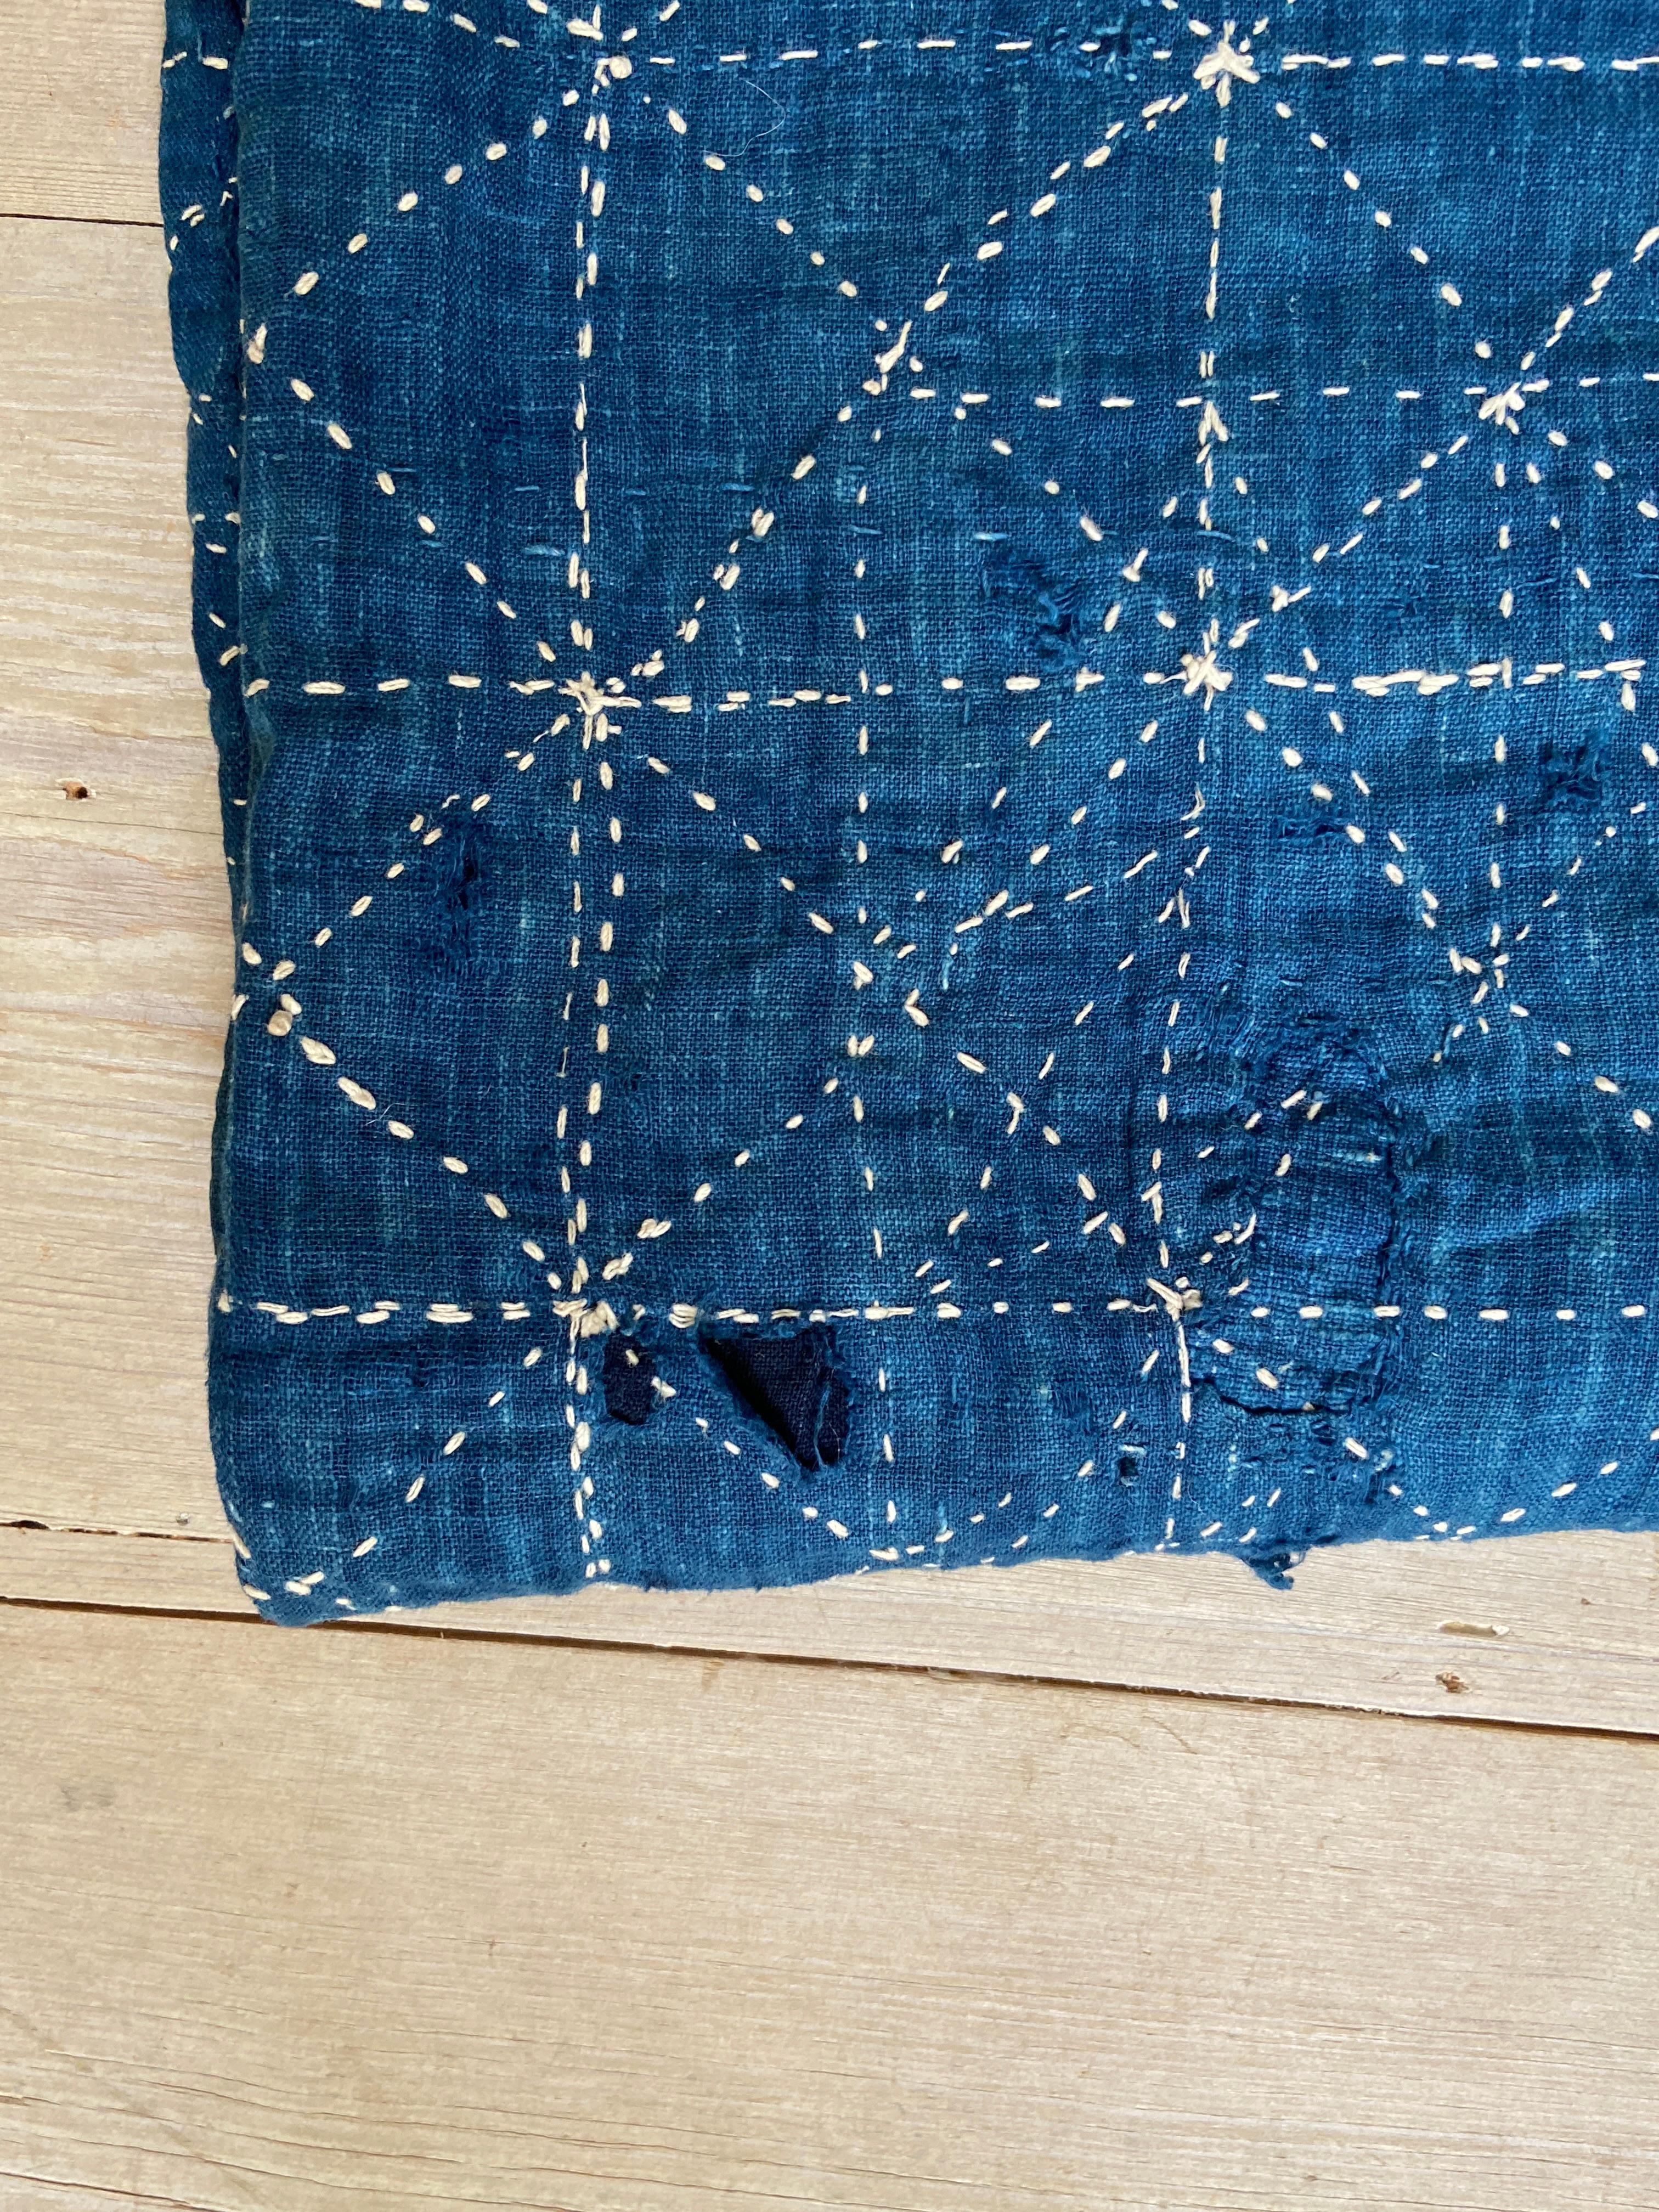 Hand-Crafted Vintage Handcrafted Patched Textile 